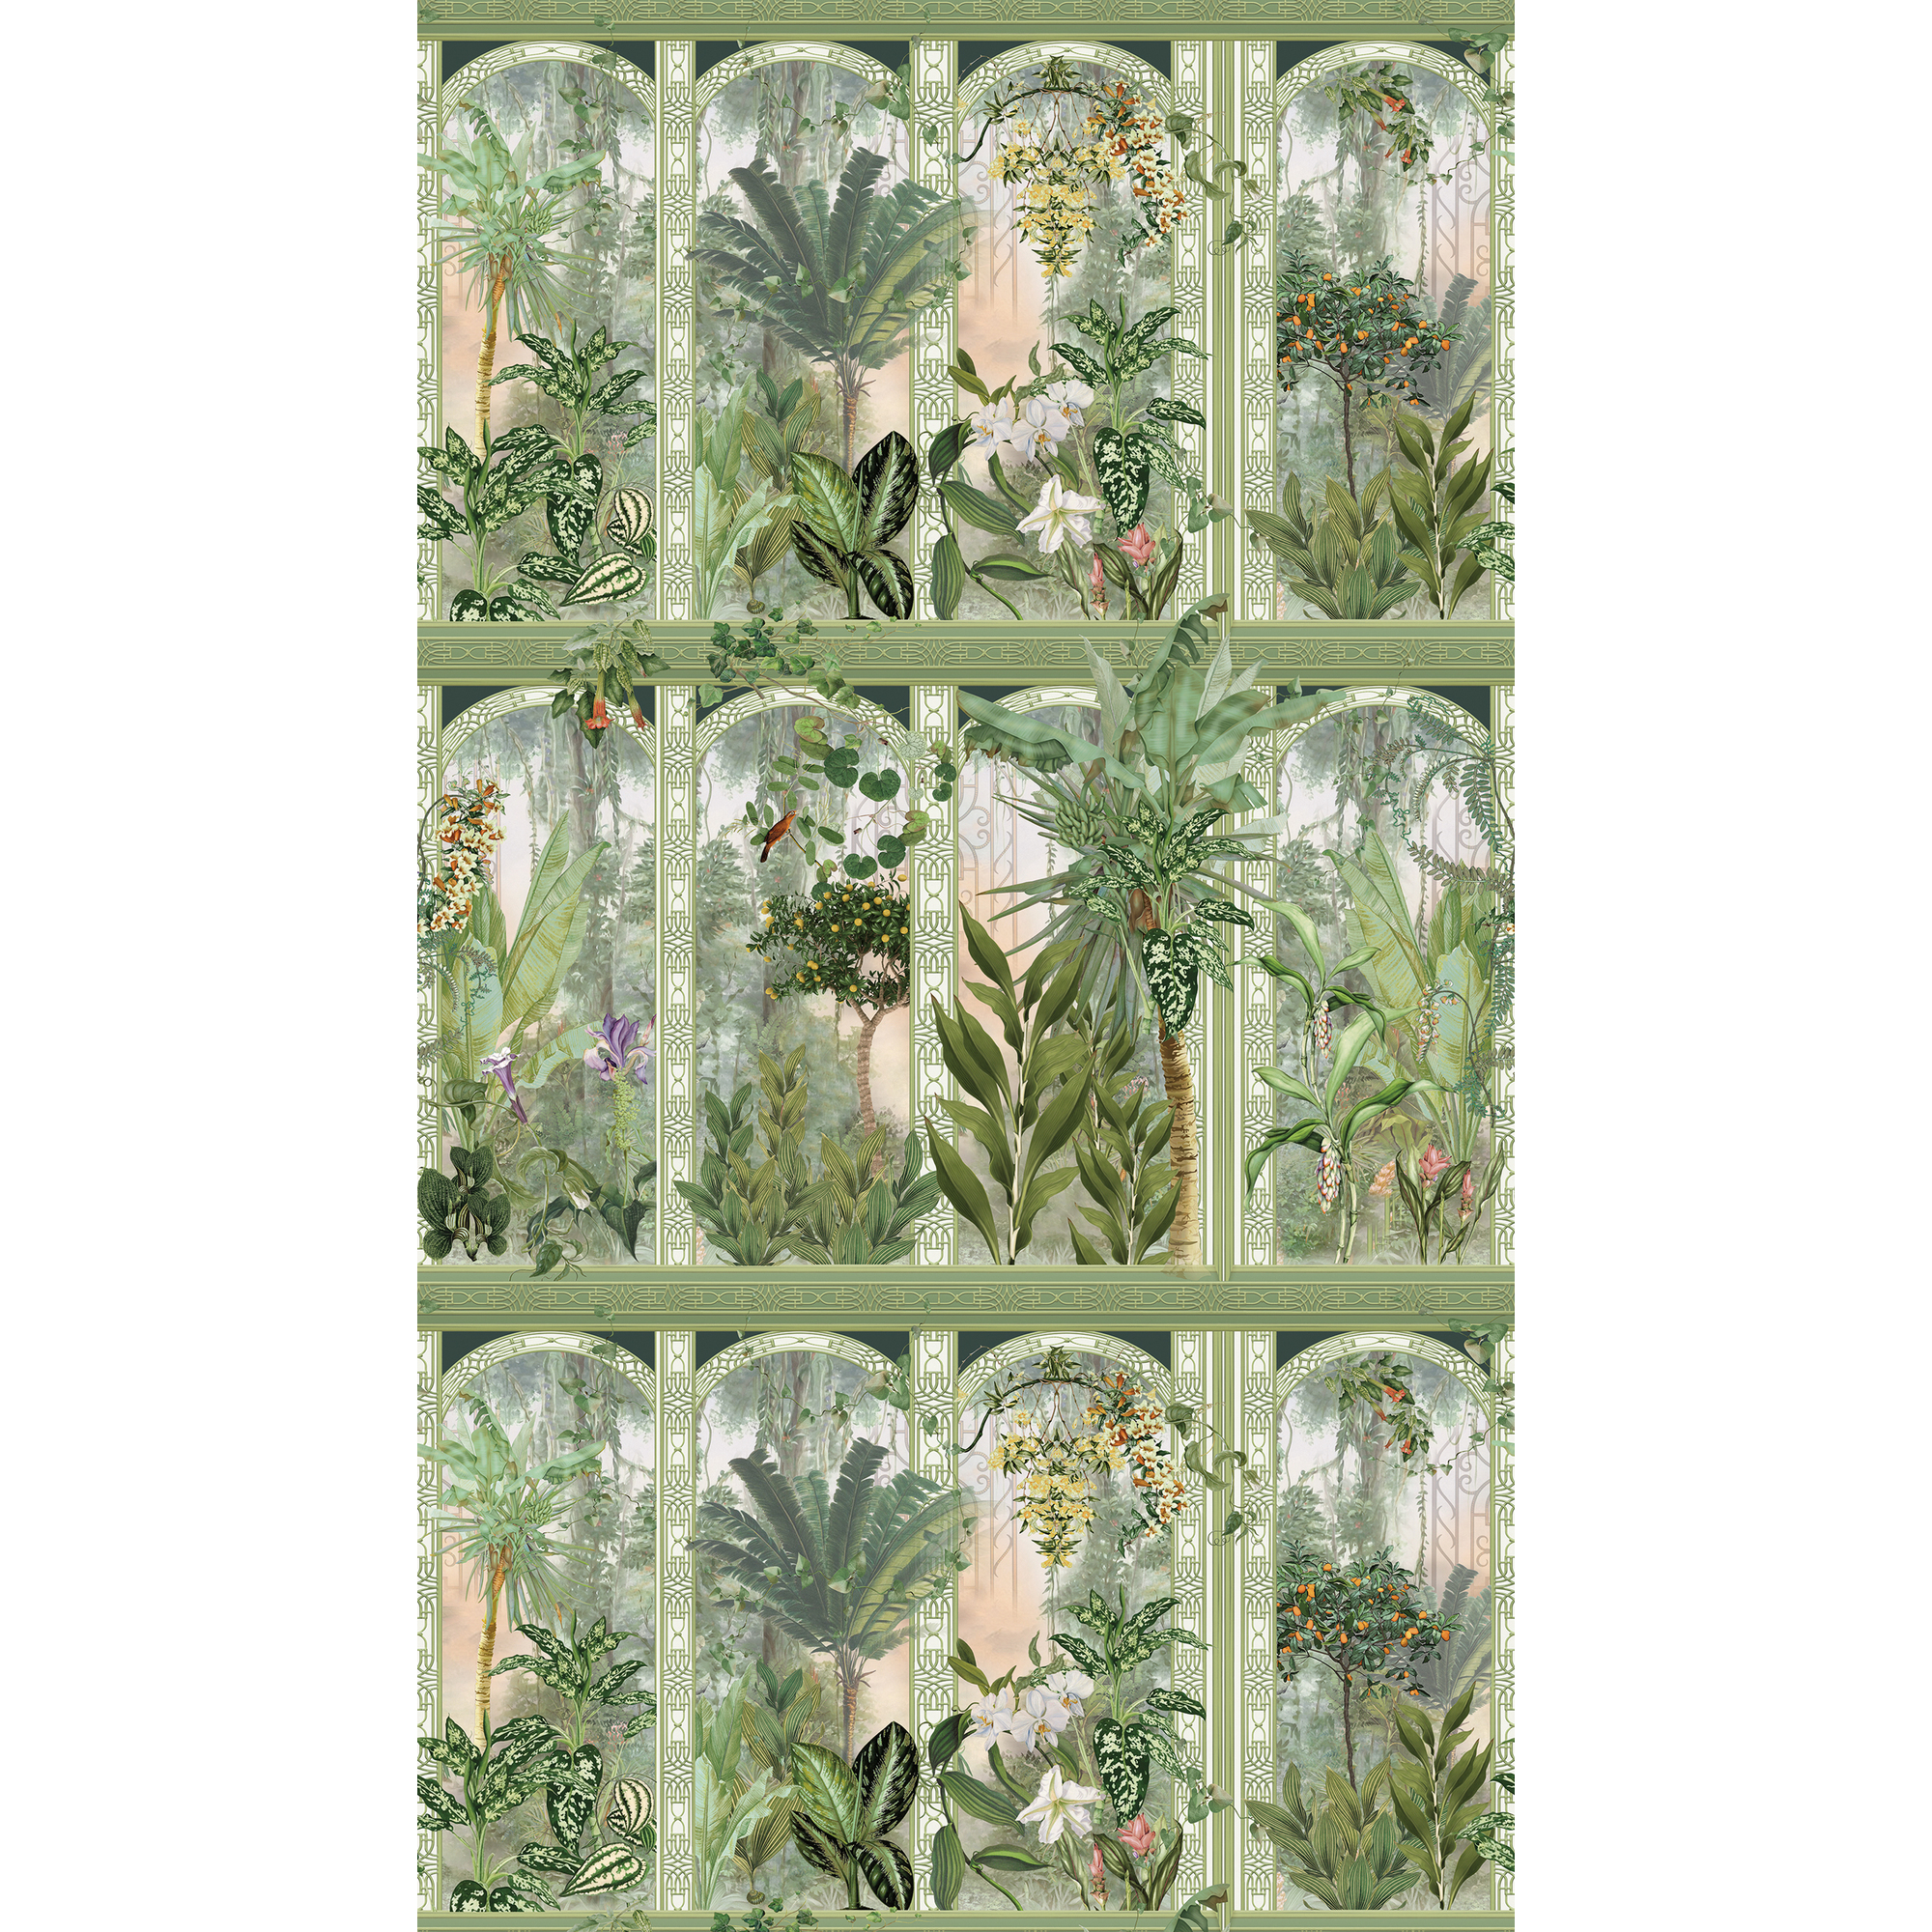 Vliestapete 'The Wall II' Fenster floral grün 3-teilig 159 x 280 cm + product picture